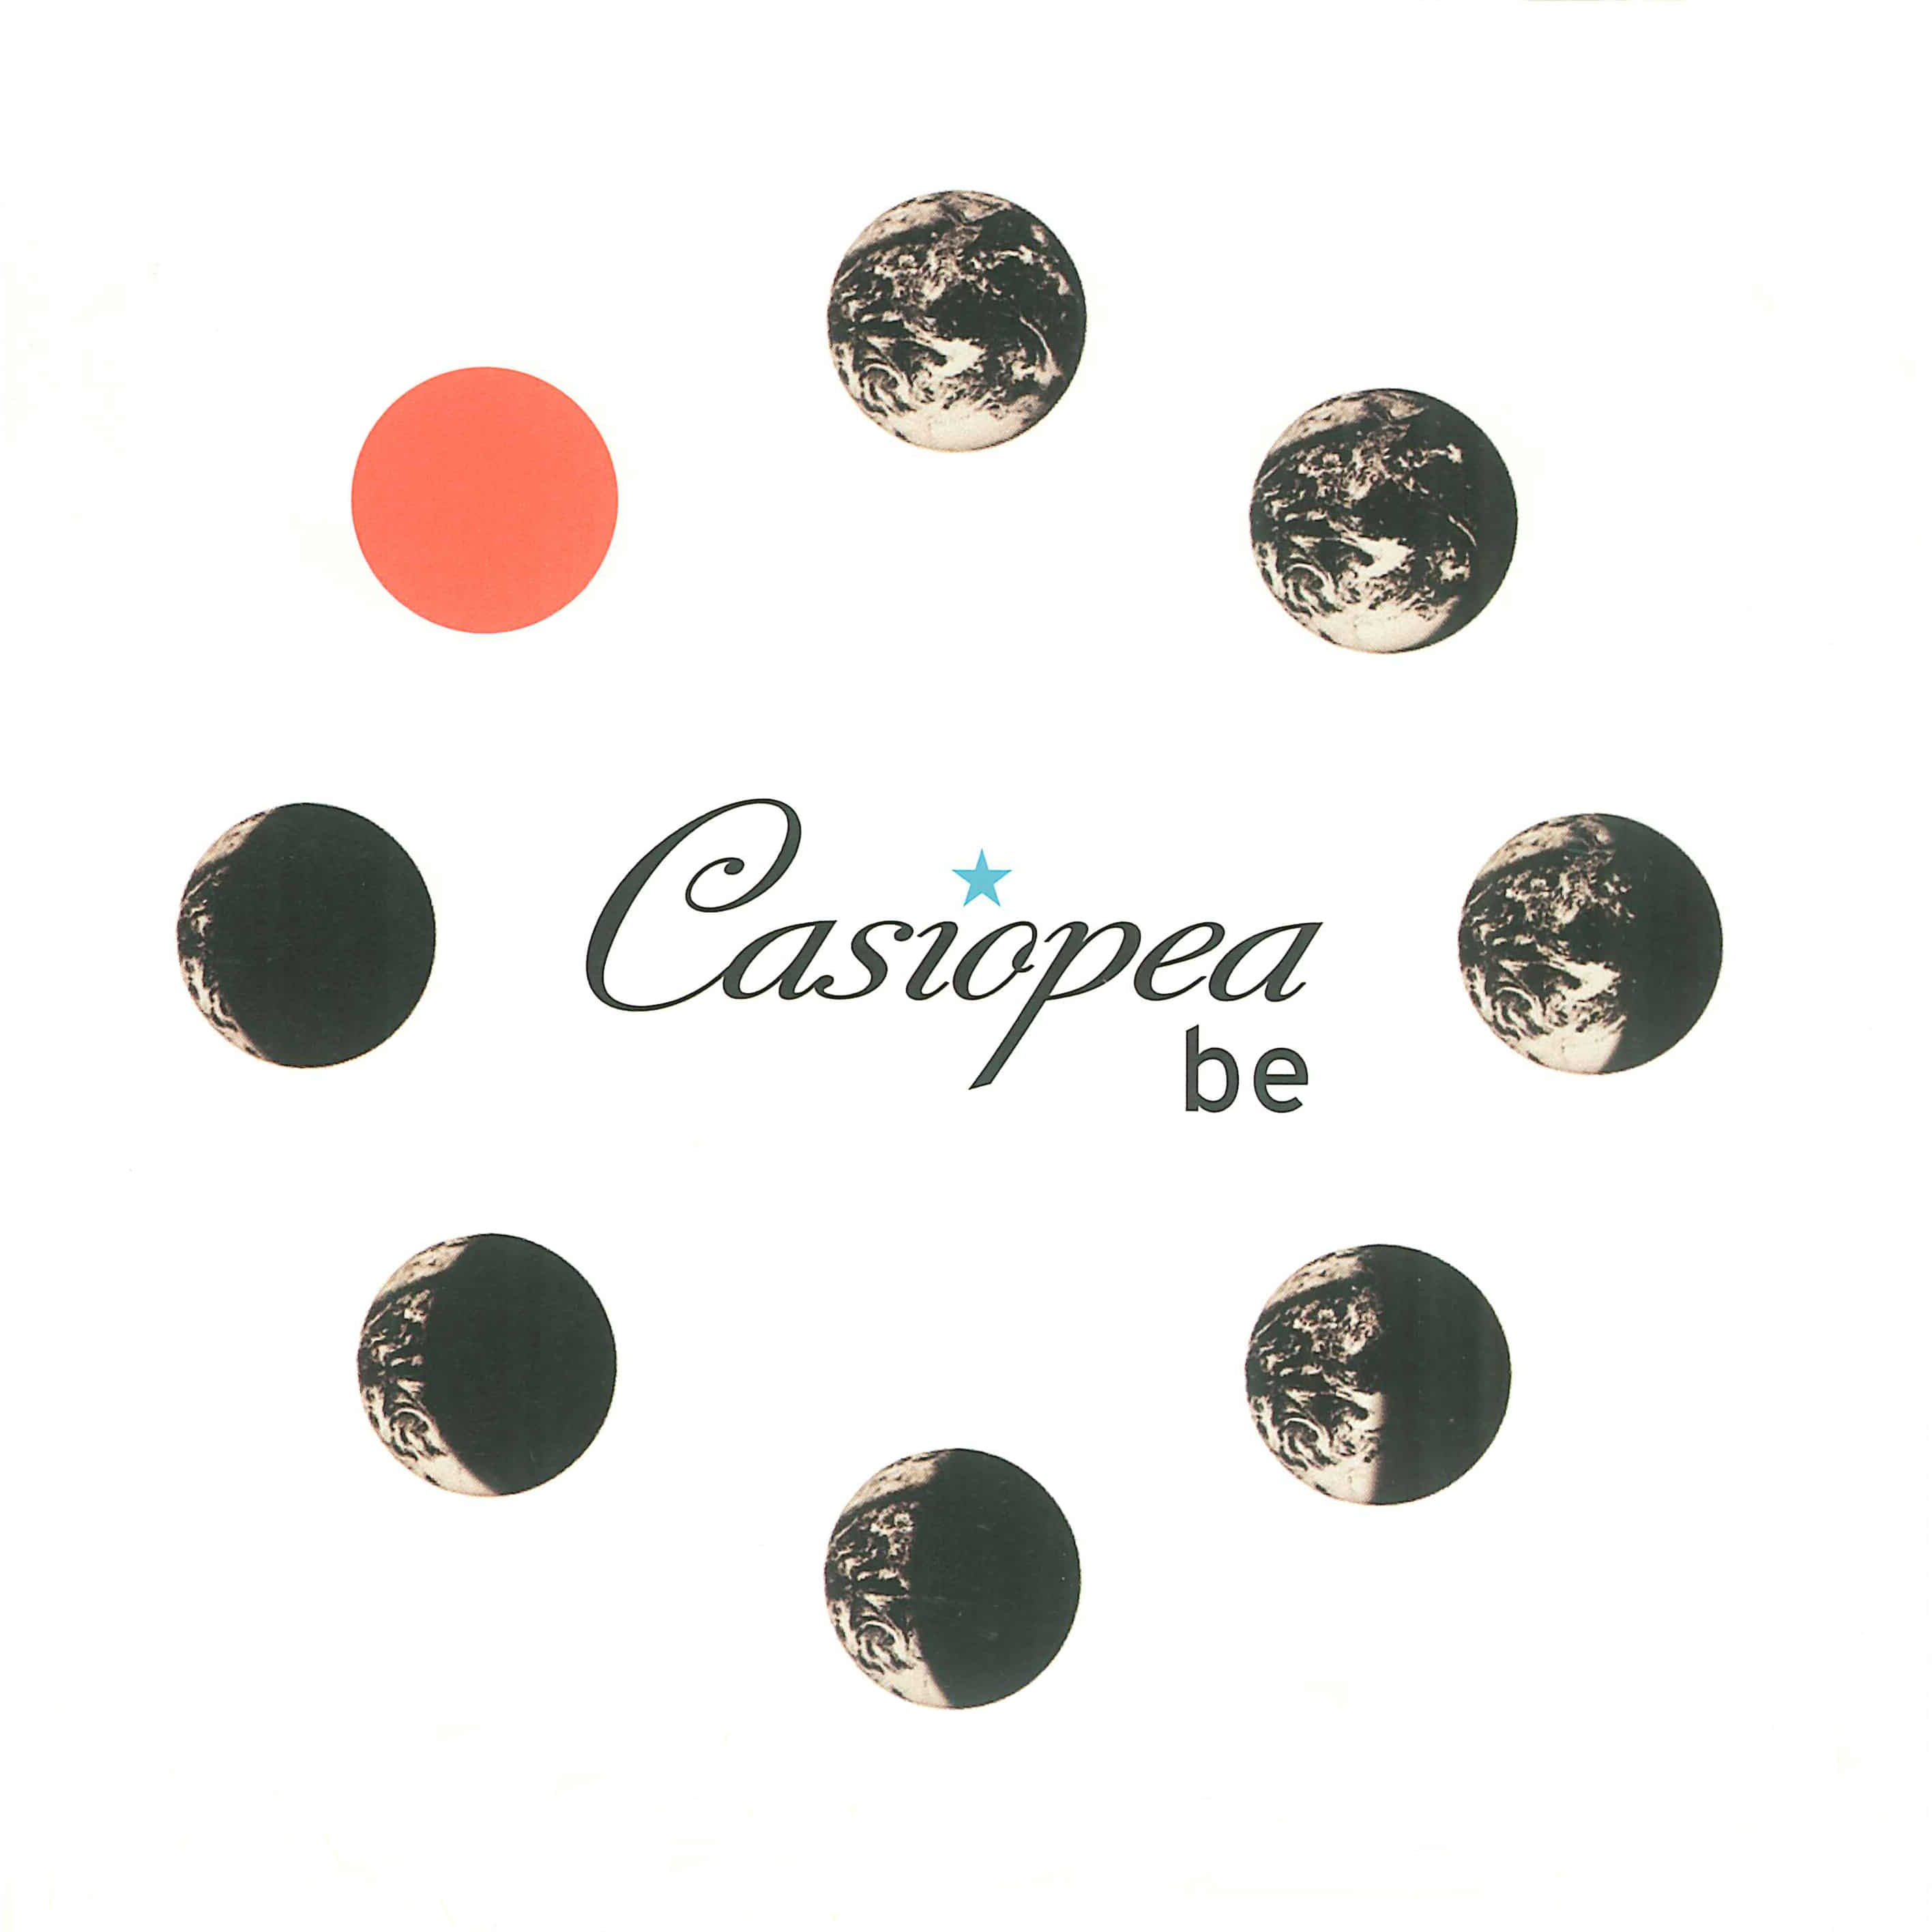 Casiopea-ALL THE TIME